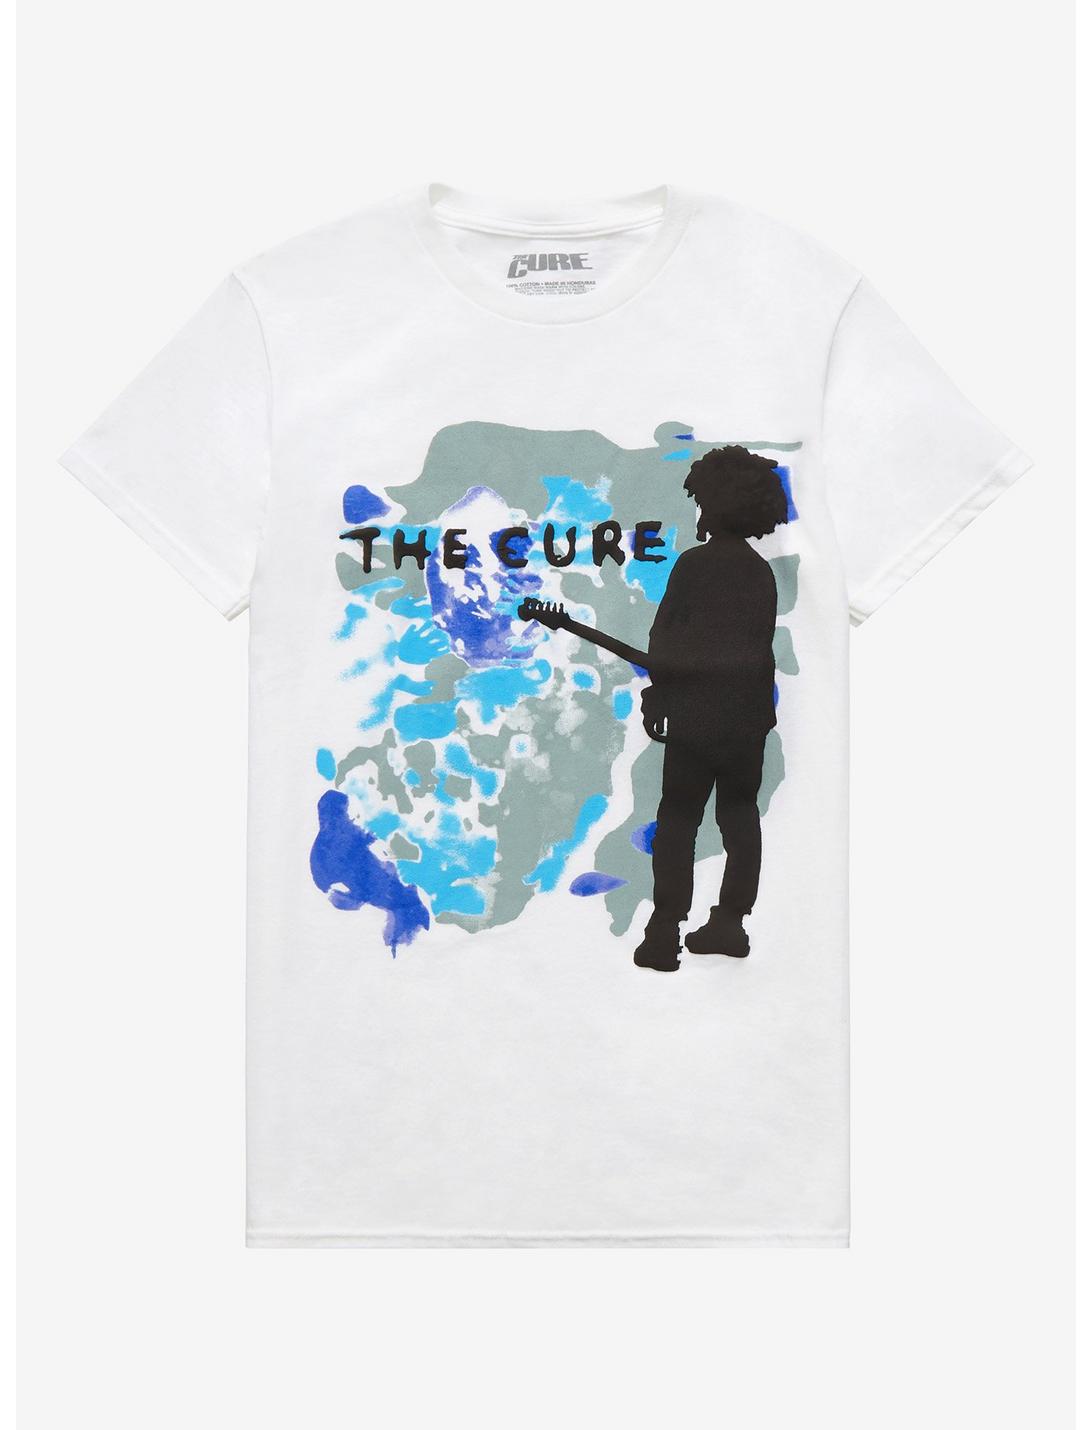 The Cure Silhouette Boyfriend Fit Girls T-Shirt, BRIGHT WHITE, hi-res